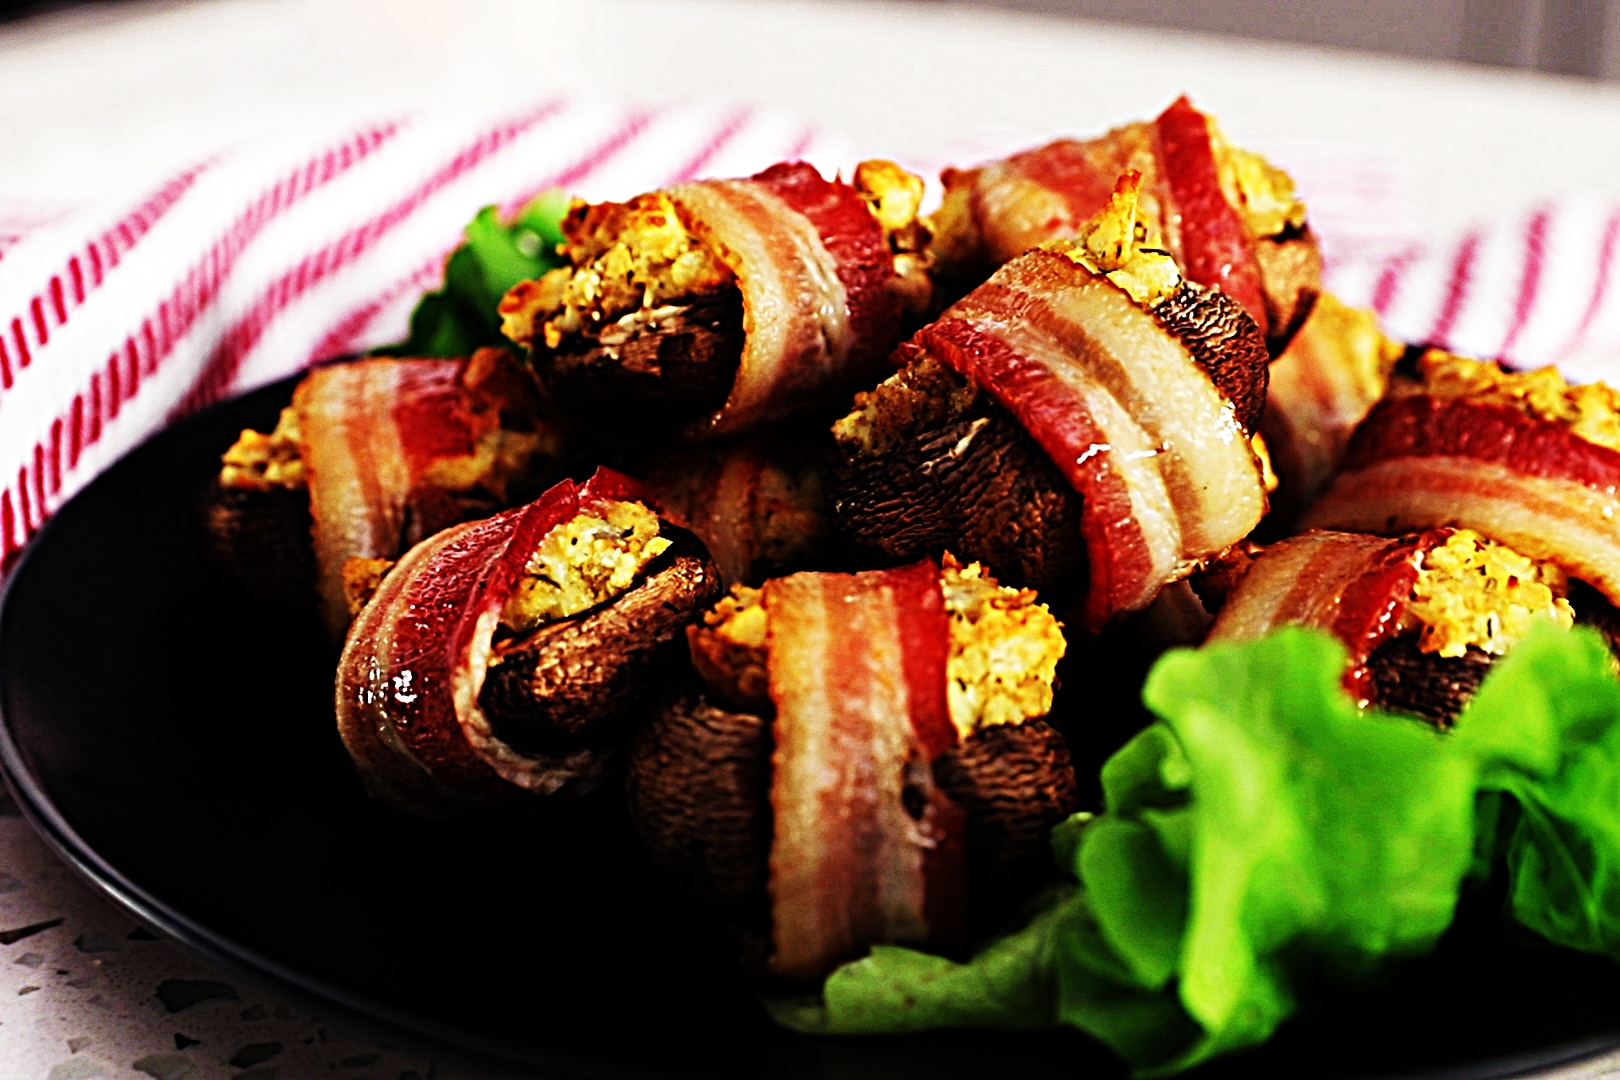 Stupid-Easy Recipe for Bacon-Wrapped Stuffed Mushrooms (#1 Top-Rated)